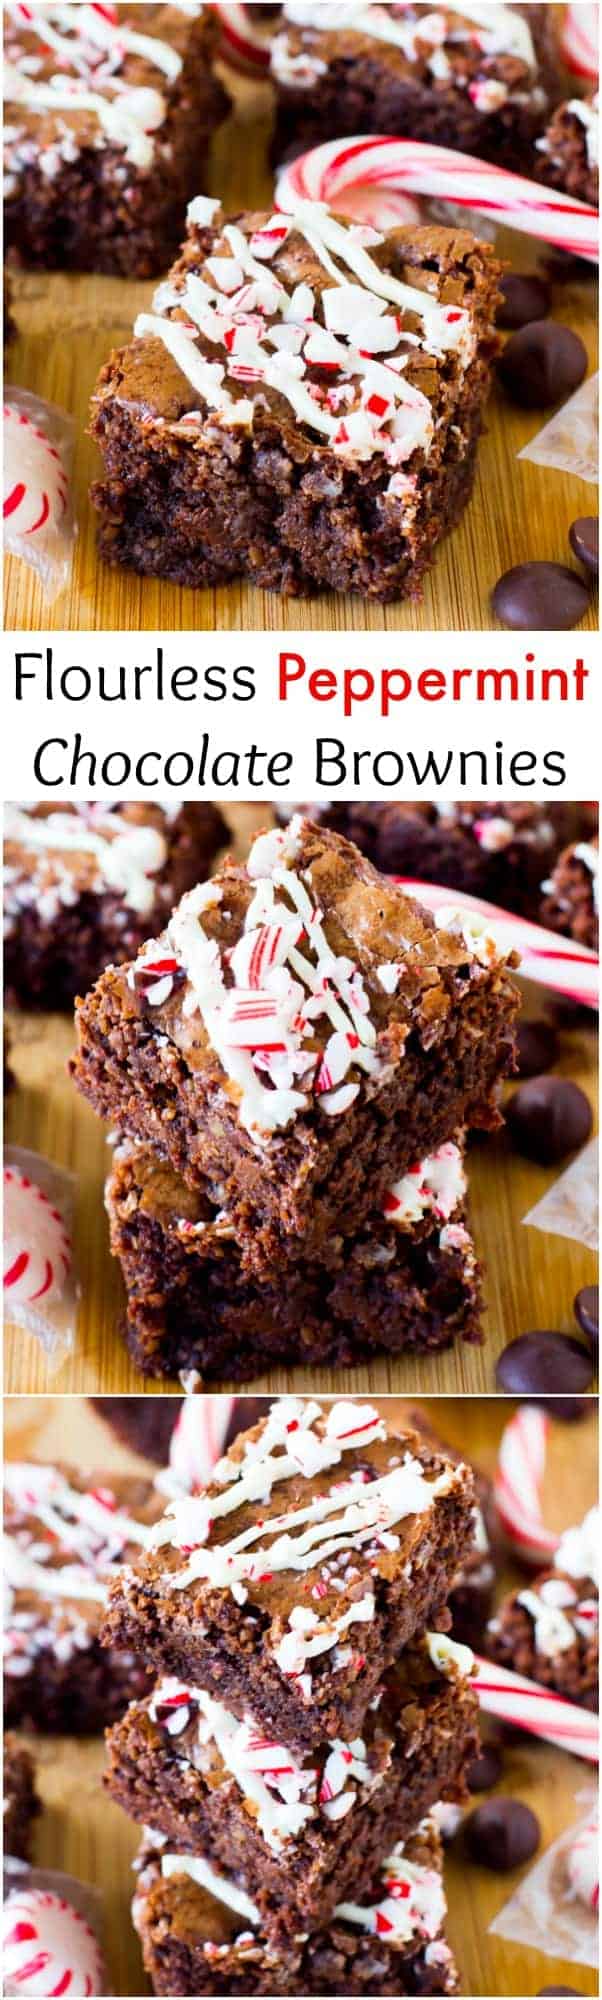 Pinterest pin for peppermint chocolate brownies.